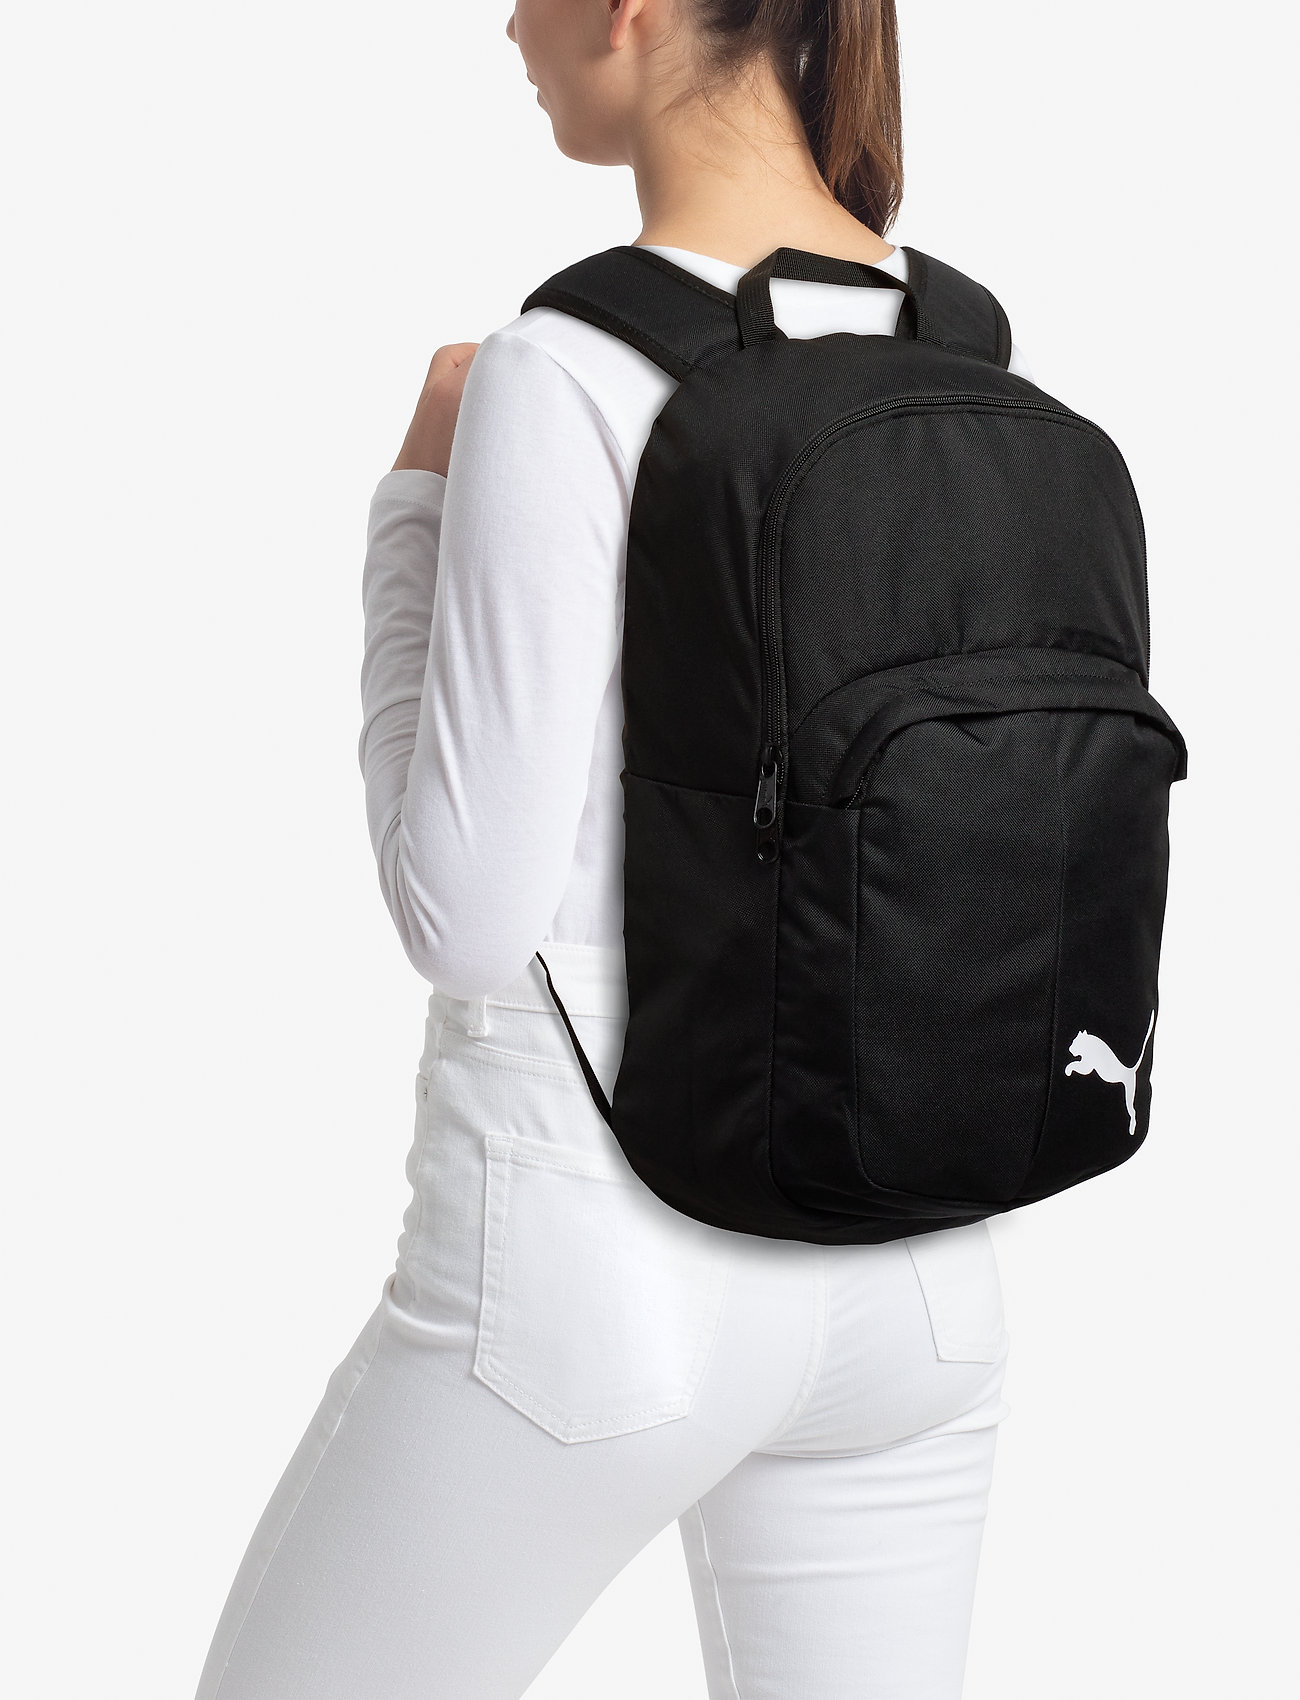 puma pro training ii backpack,Boutique Officielle